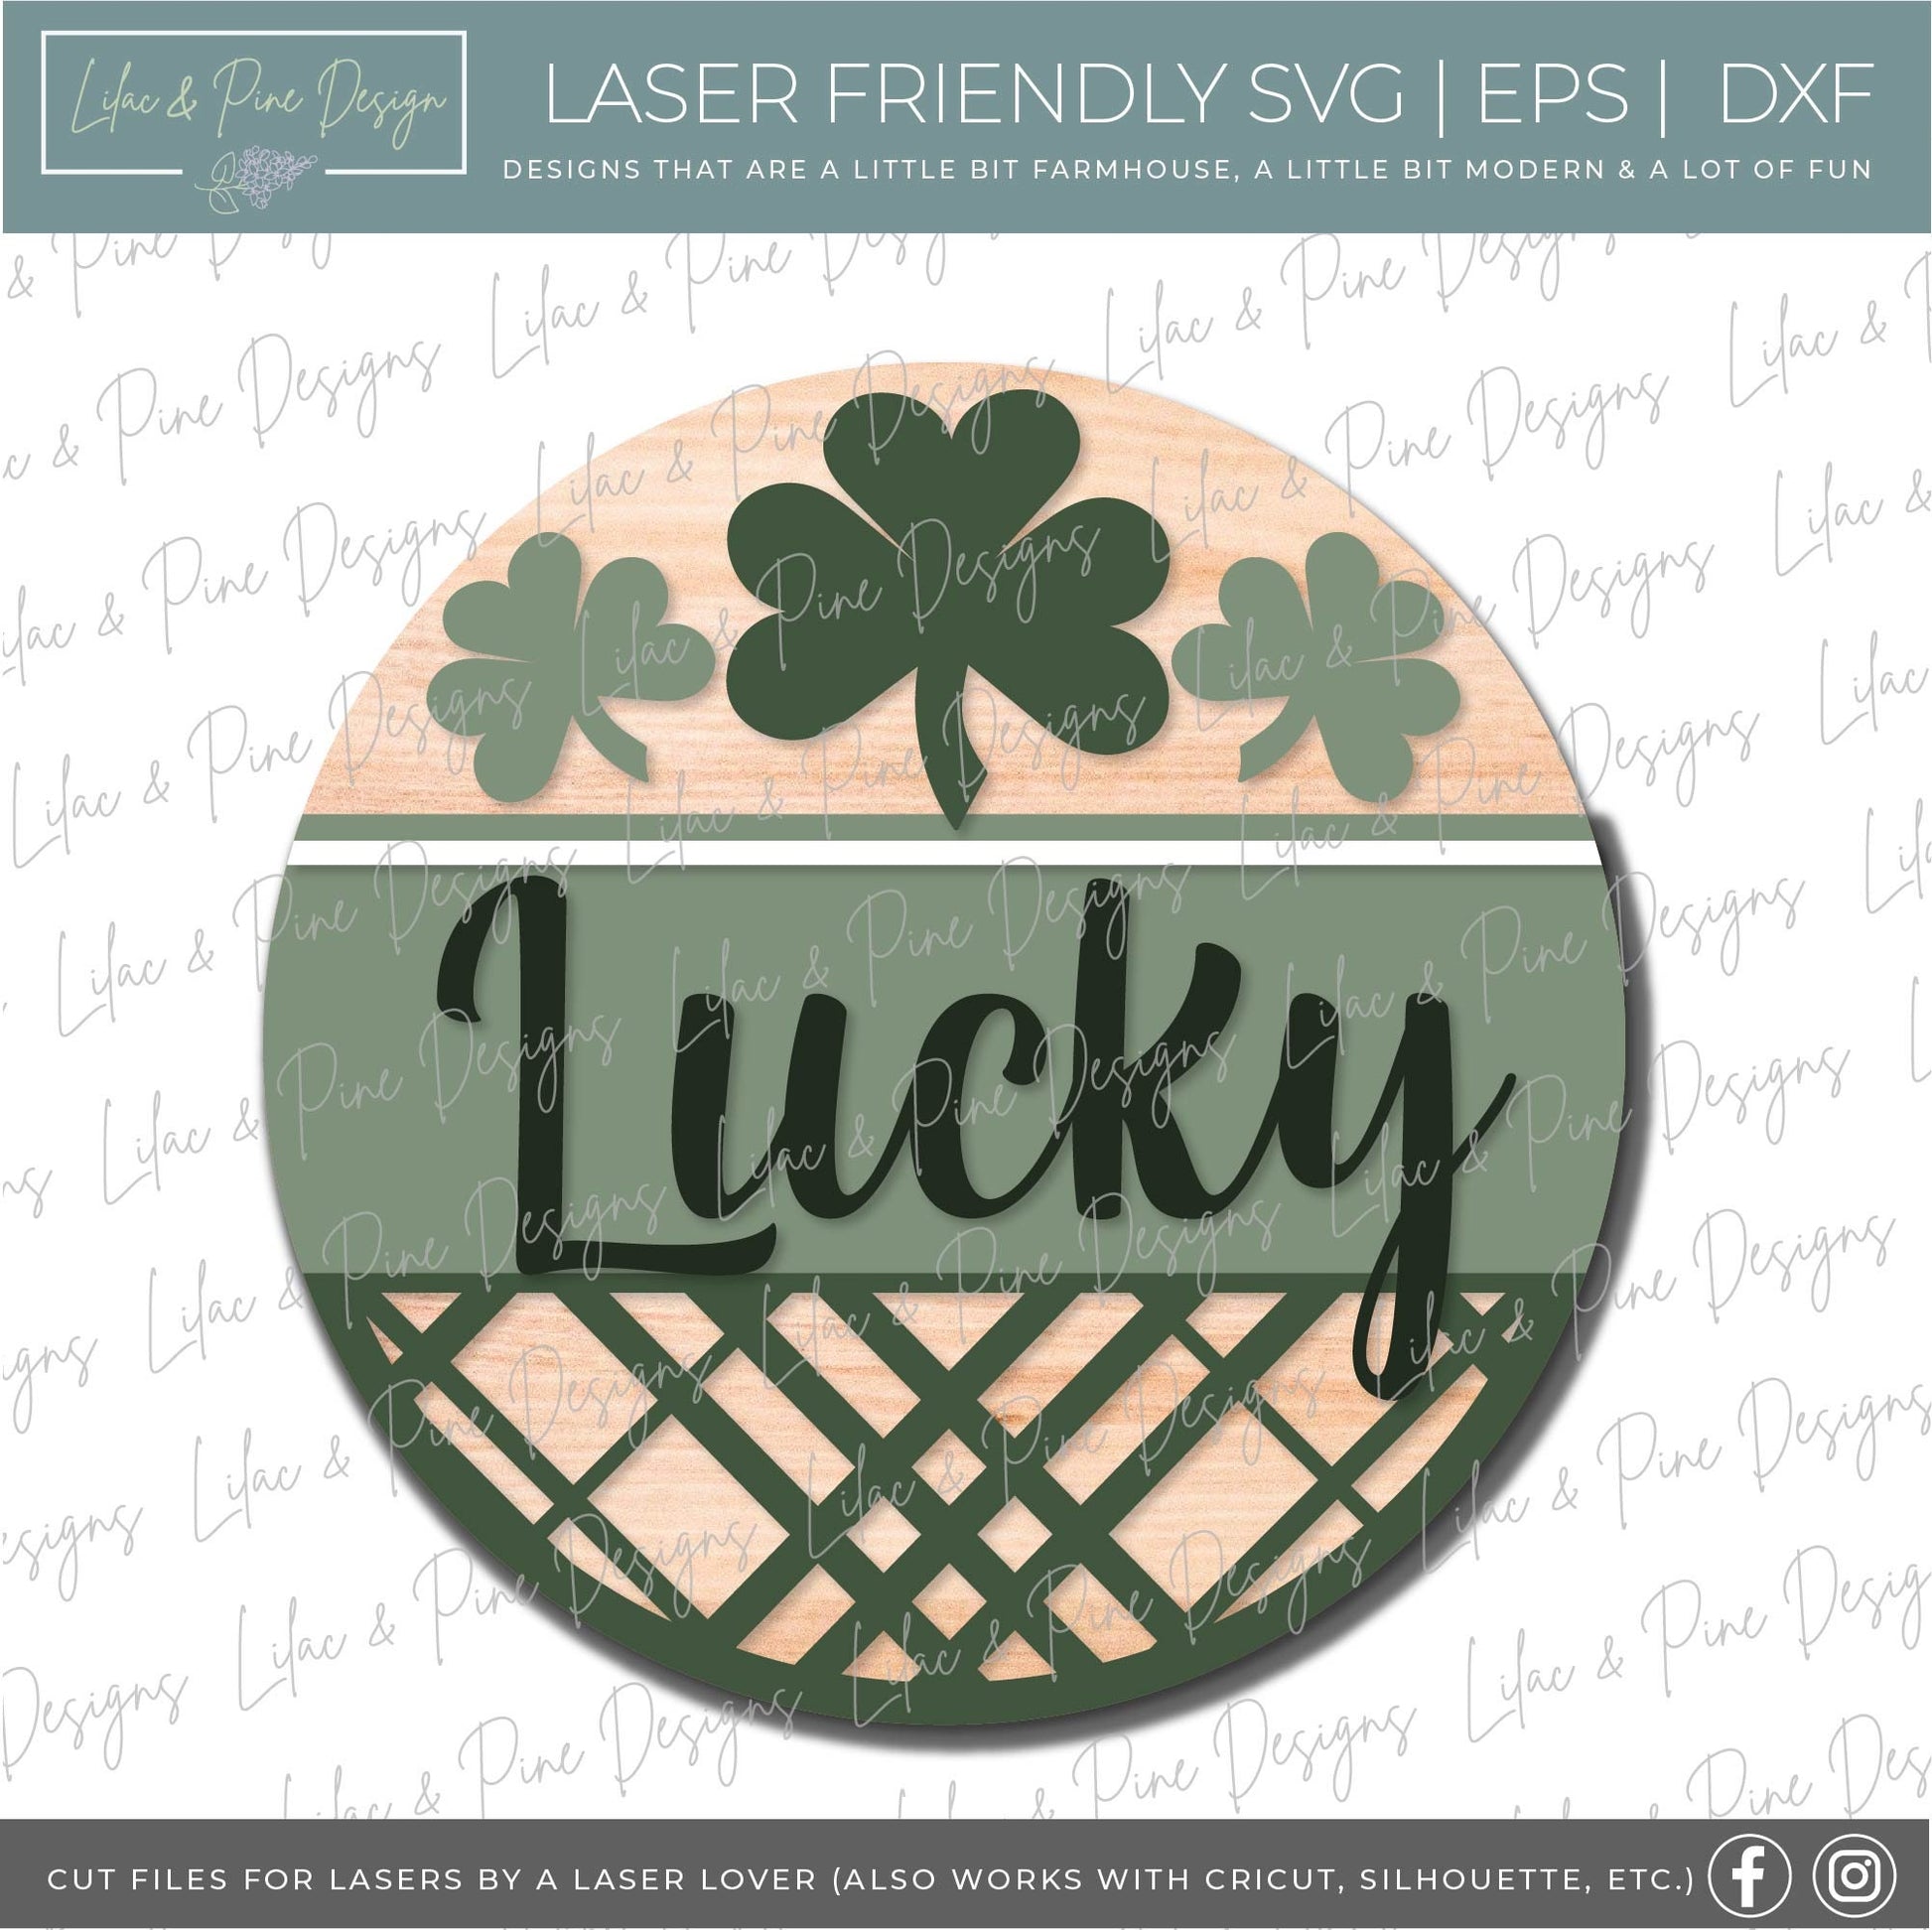 Lucky St Patrick Welcome door hanger SVG, personalized welcome SVG, Blessed St Paddy welcome sign, shamrock SVG, Glowforge file, laser svg